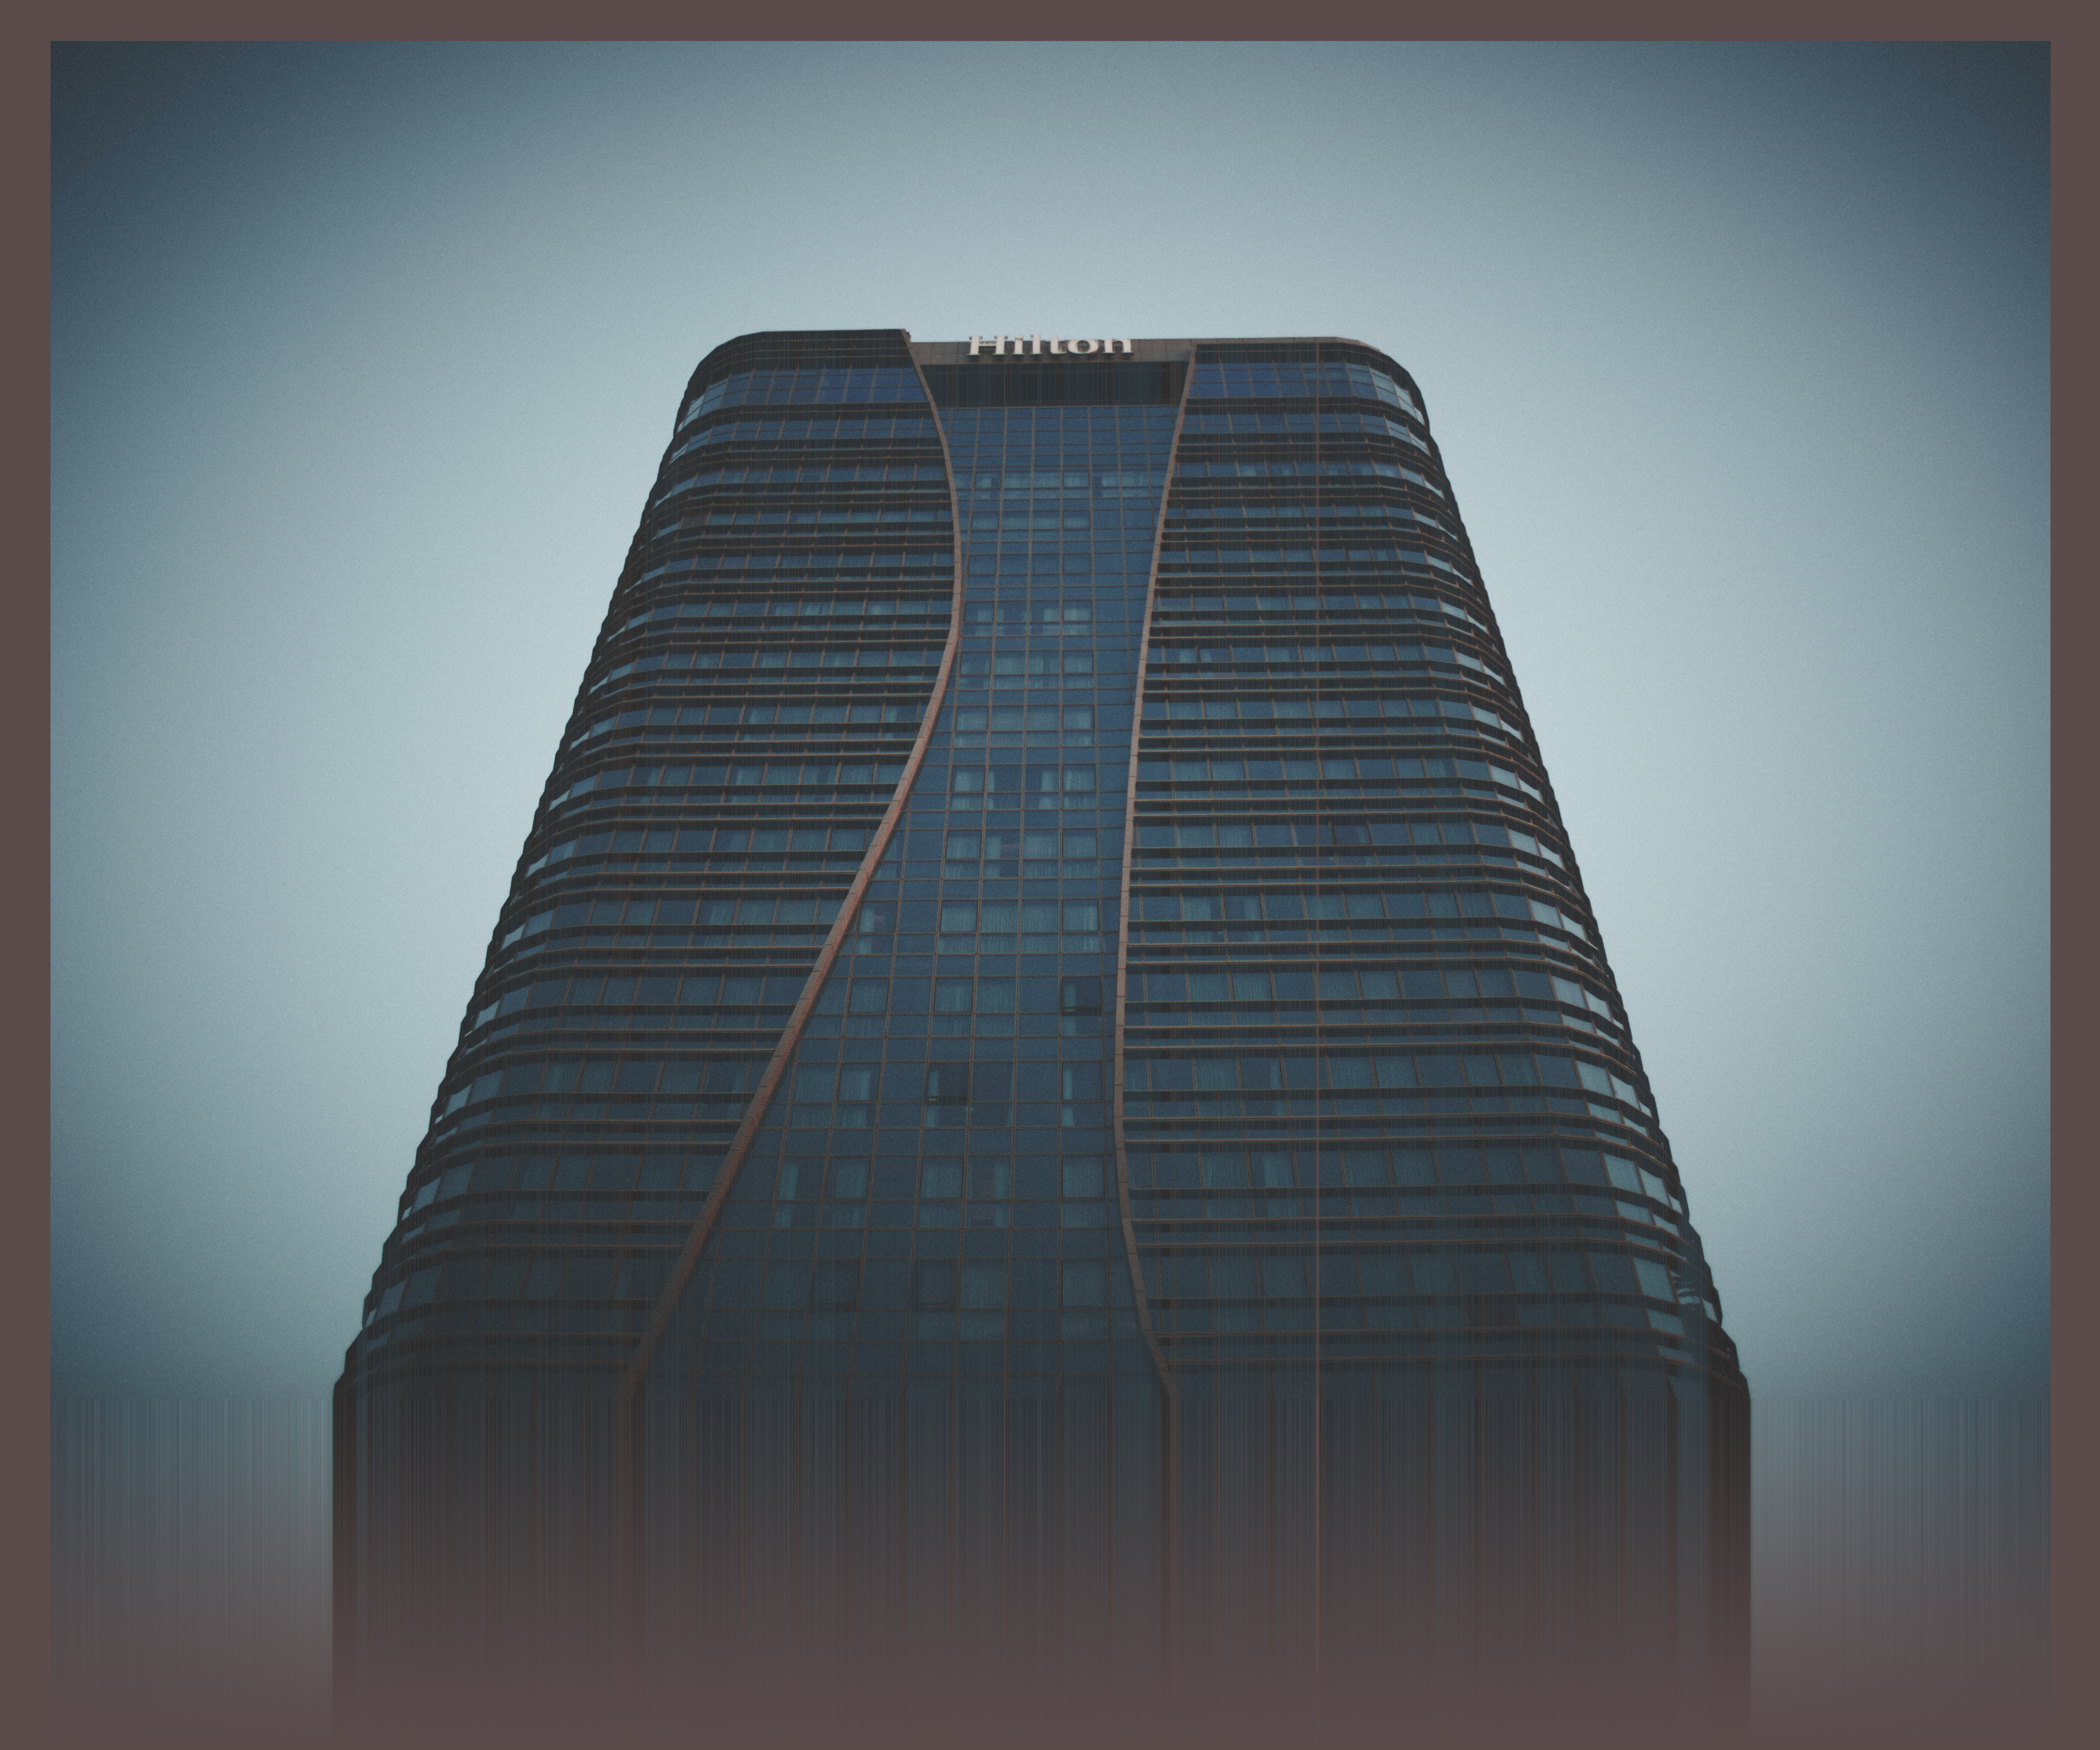 Hotel Building Skyscraper Teal Glitch Art Photoshopped Photography Noise 4200x3500